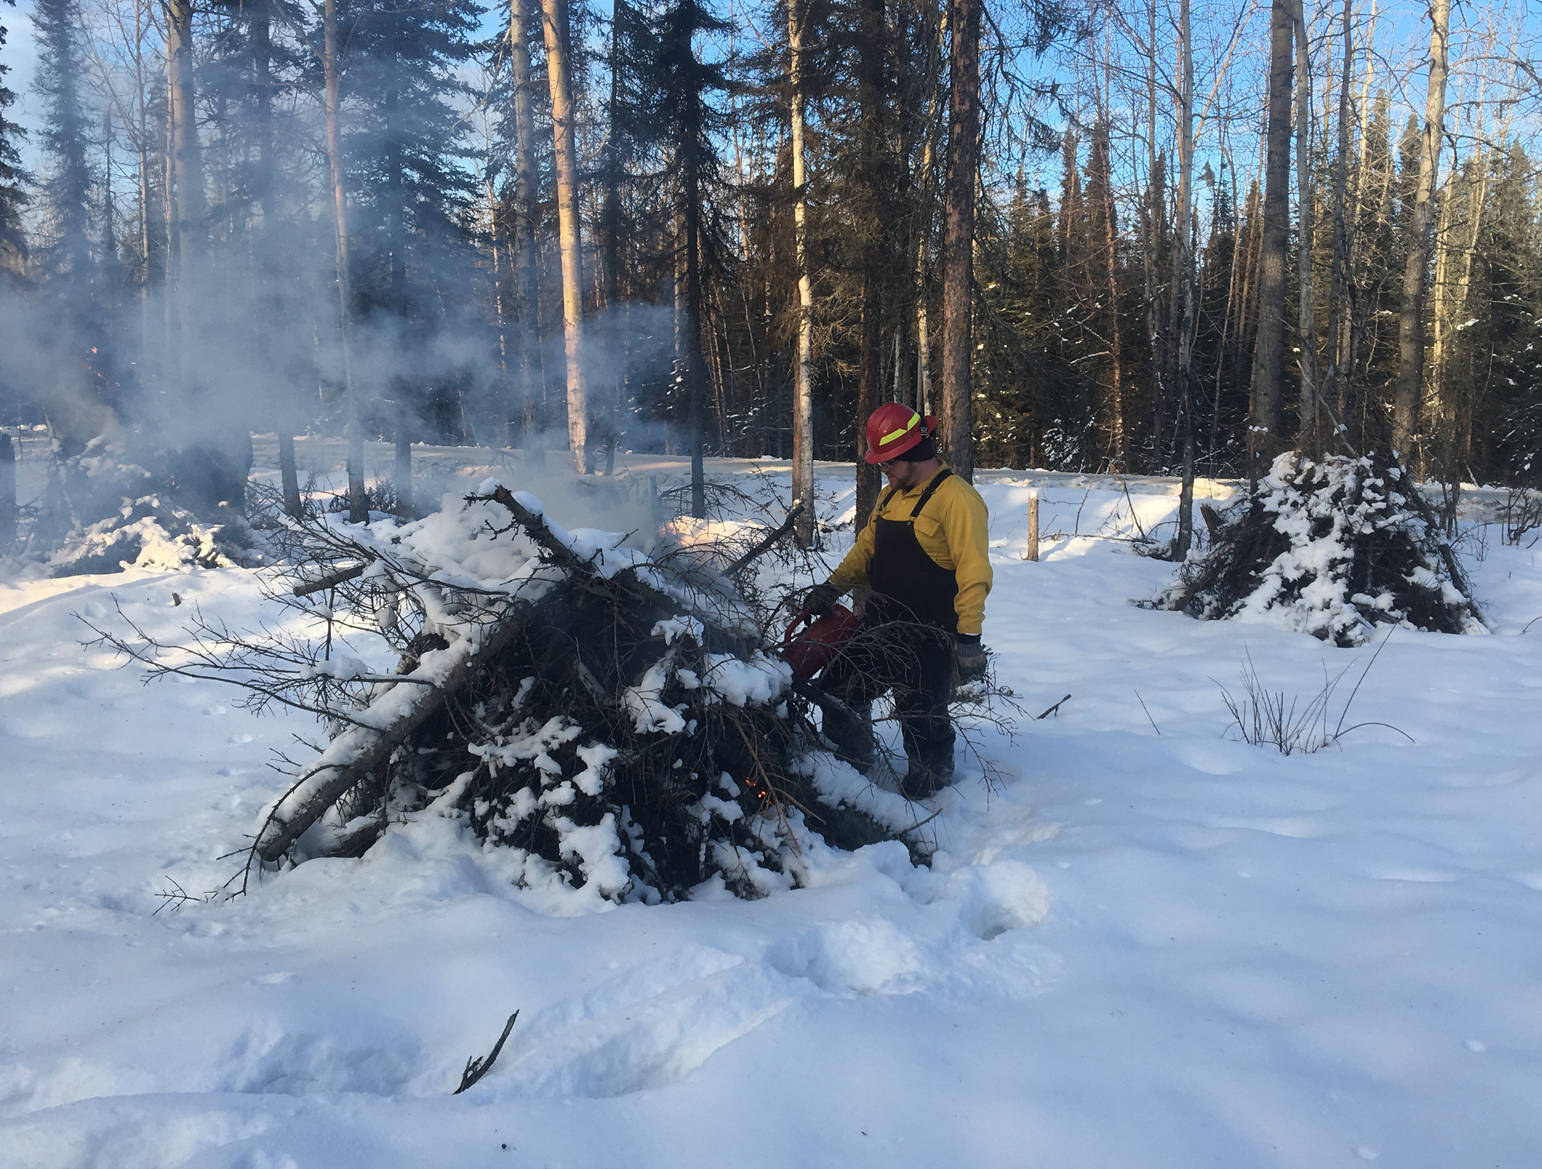 Using a drip torch to light piled vegetation and other burnable debris to reduce fuel loads along the wildland-urban interface on Funny River Road. (Photo courtesy Kenai National Wildlife Refuge)